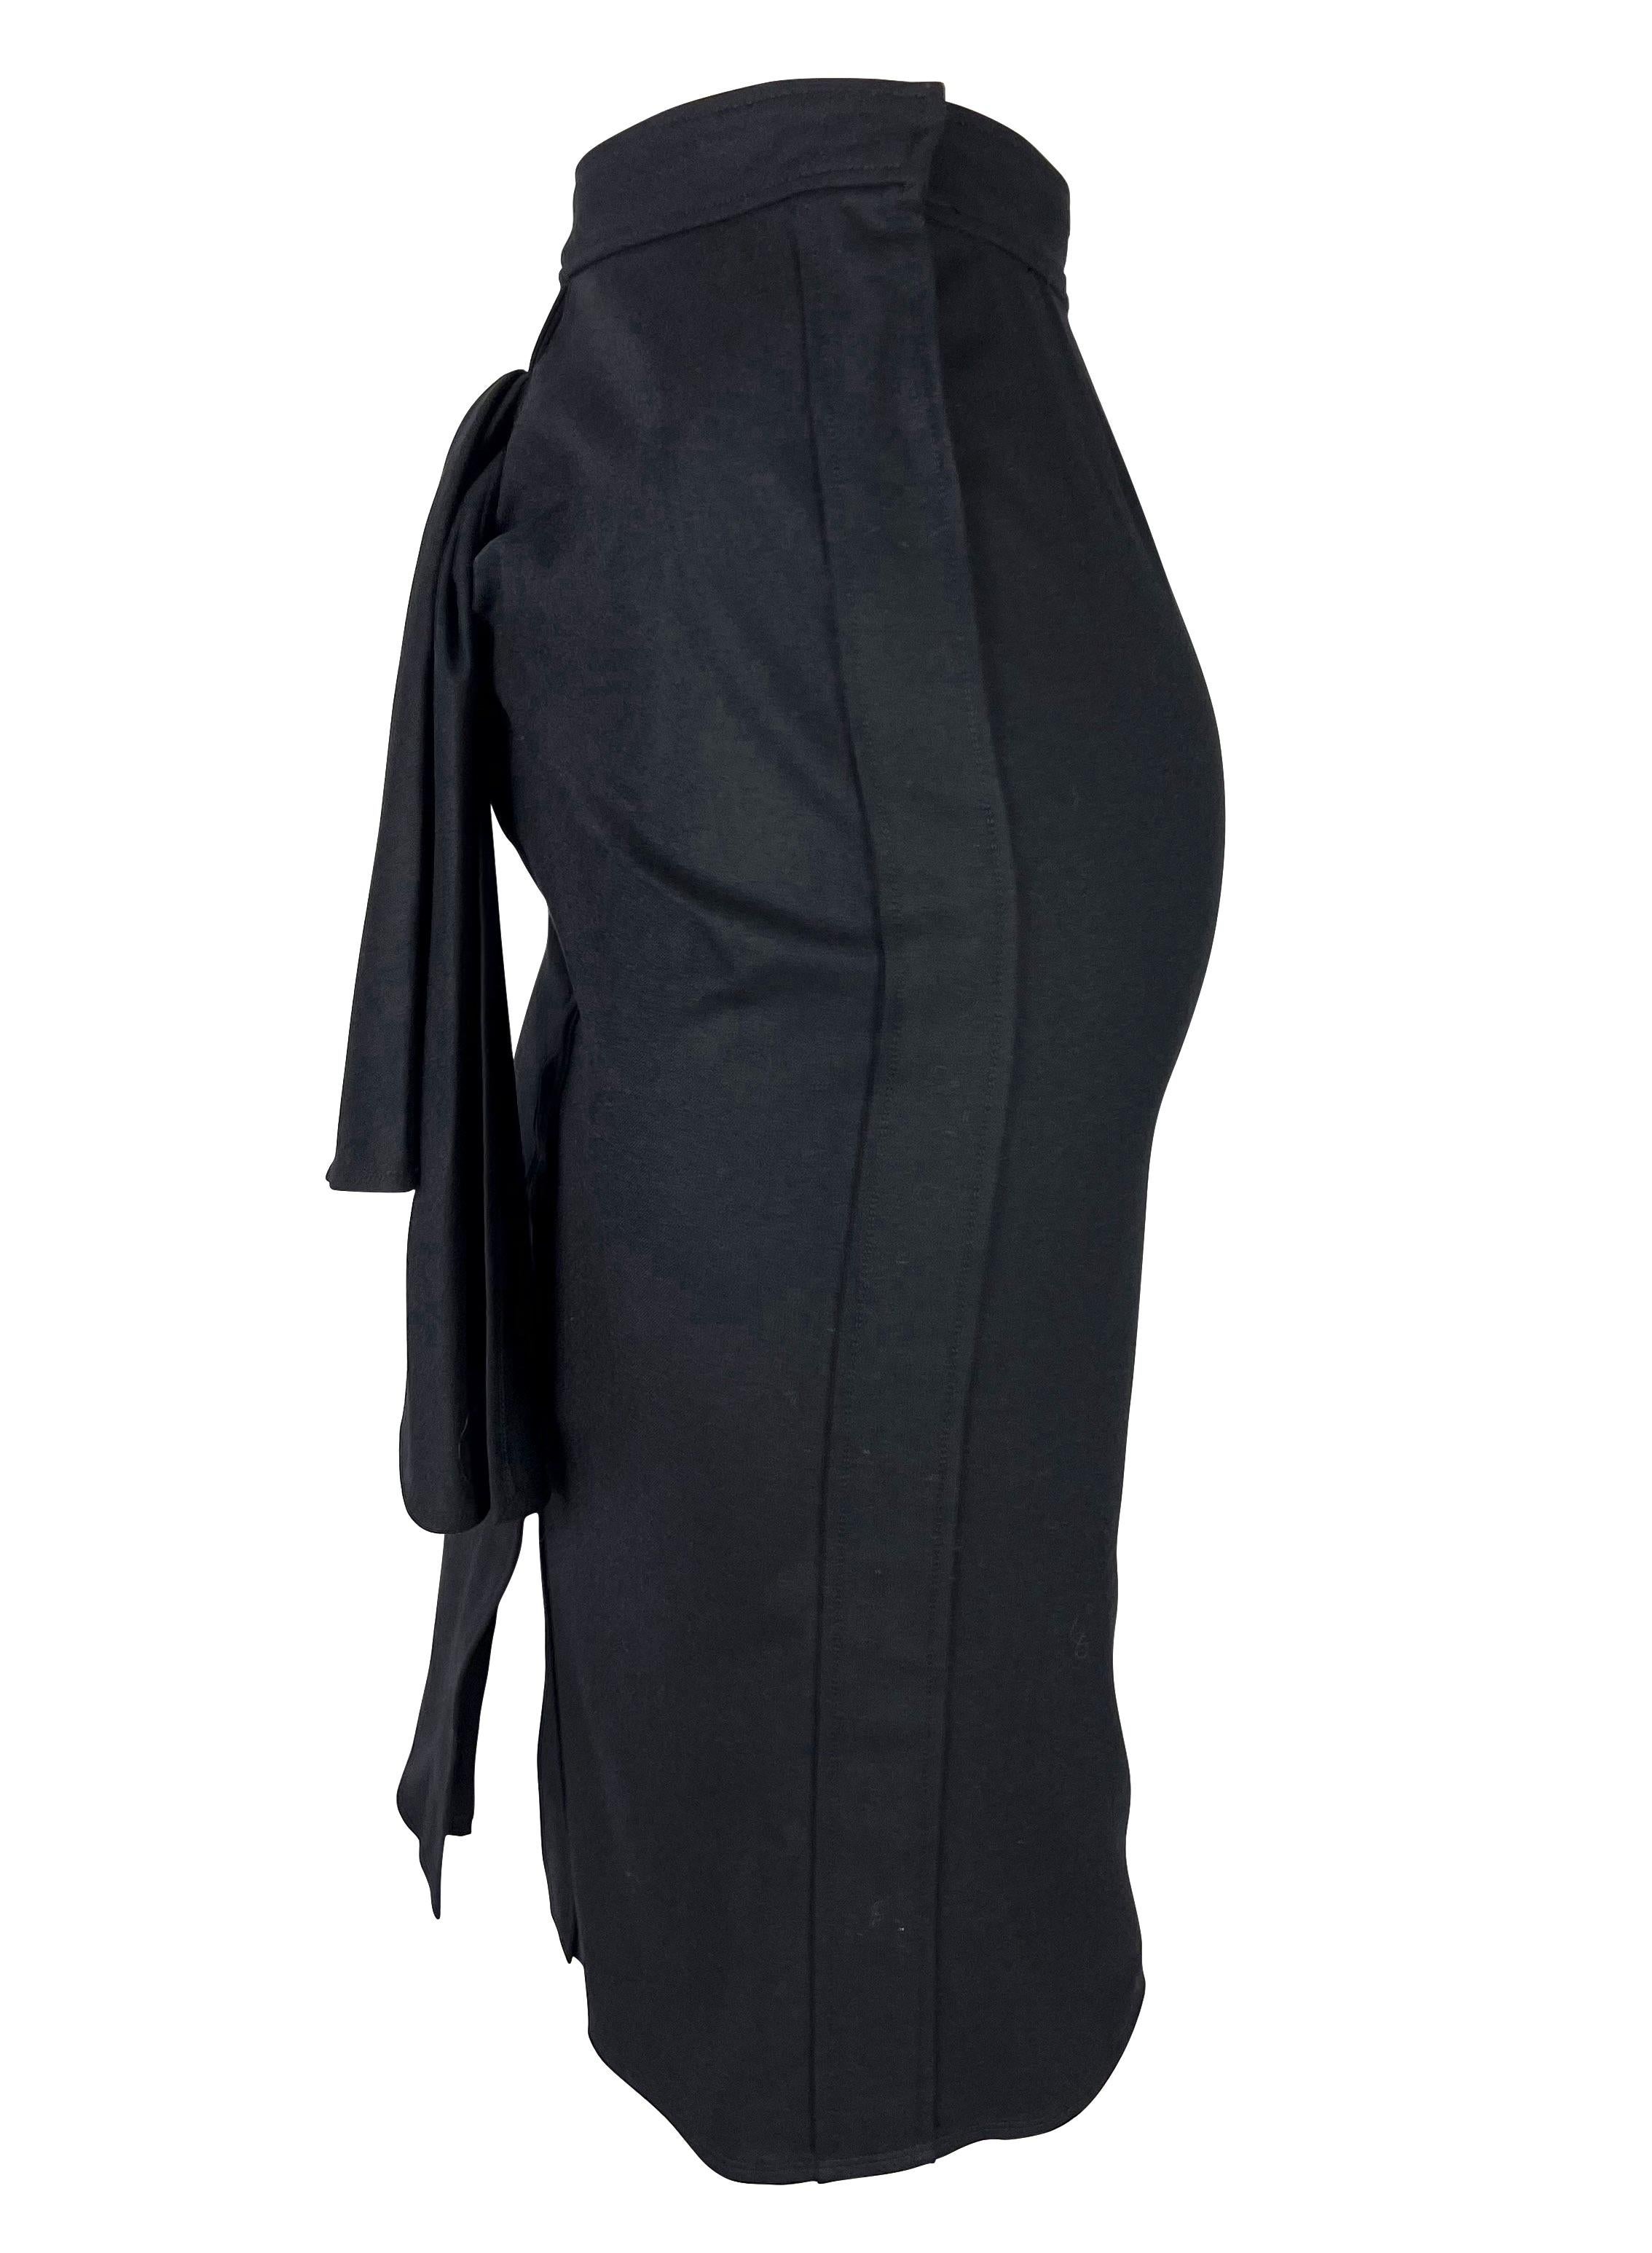 Presenting a beautiful black Yves Saint Laurent Rive Gauche skirt designed by Tom Ford. From the 2000s, this fabulous skirt features ruching and folded fabric at the front.

Approximate measurements:
Size - FR36
Waistband to hem: 26.5”
Waist: